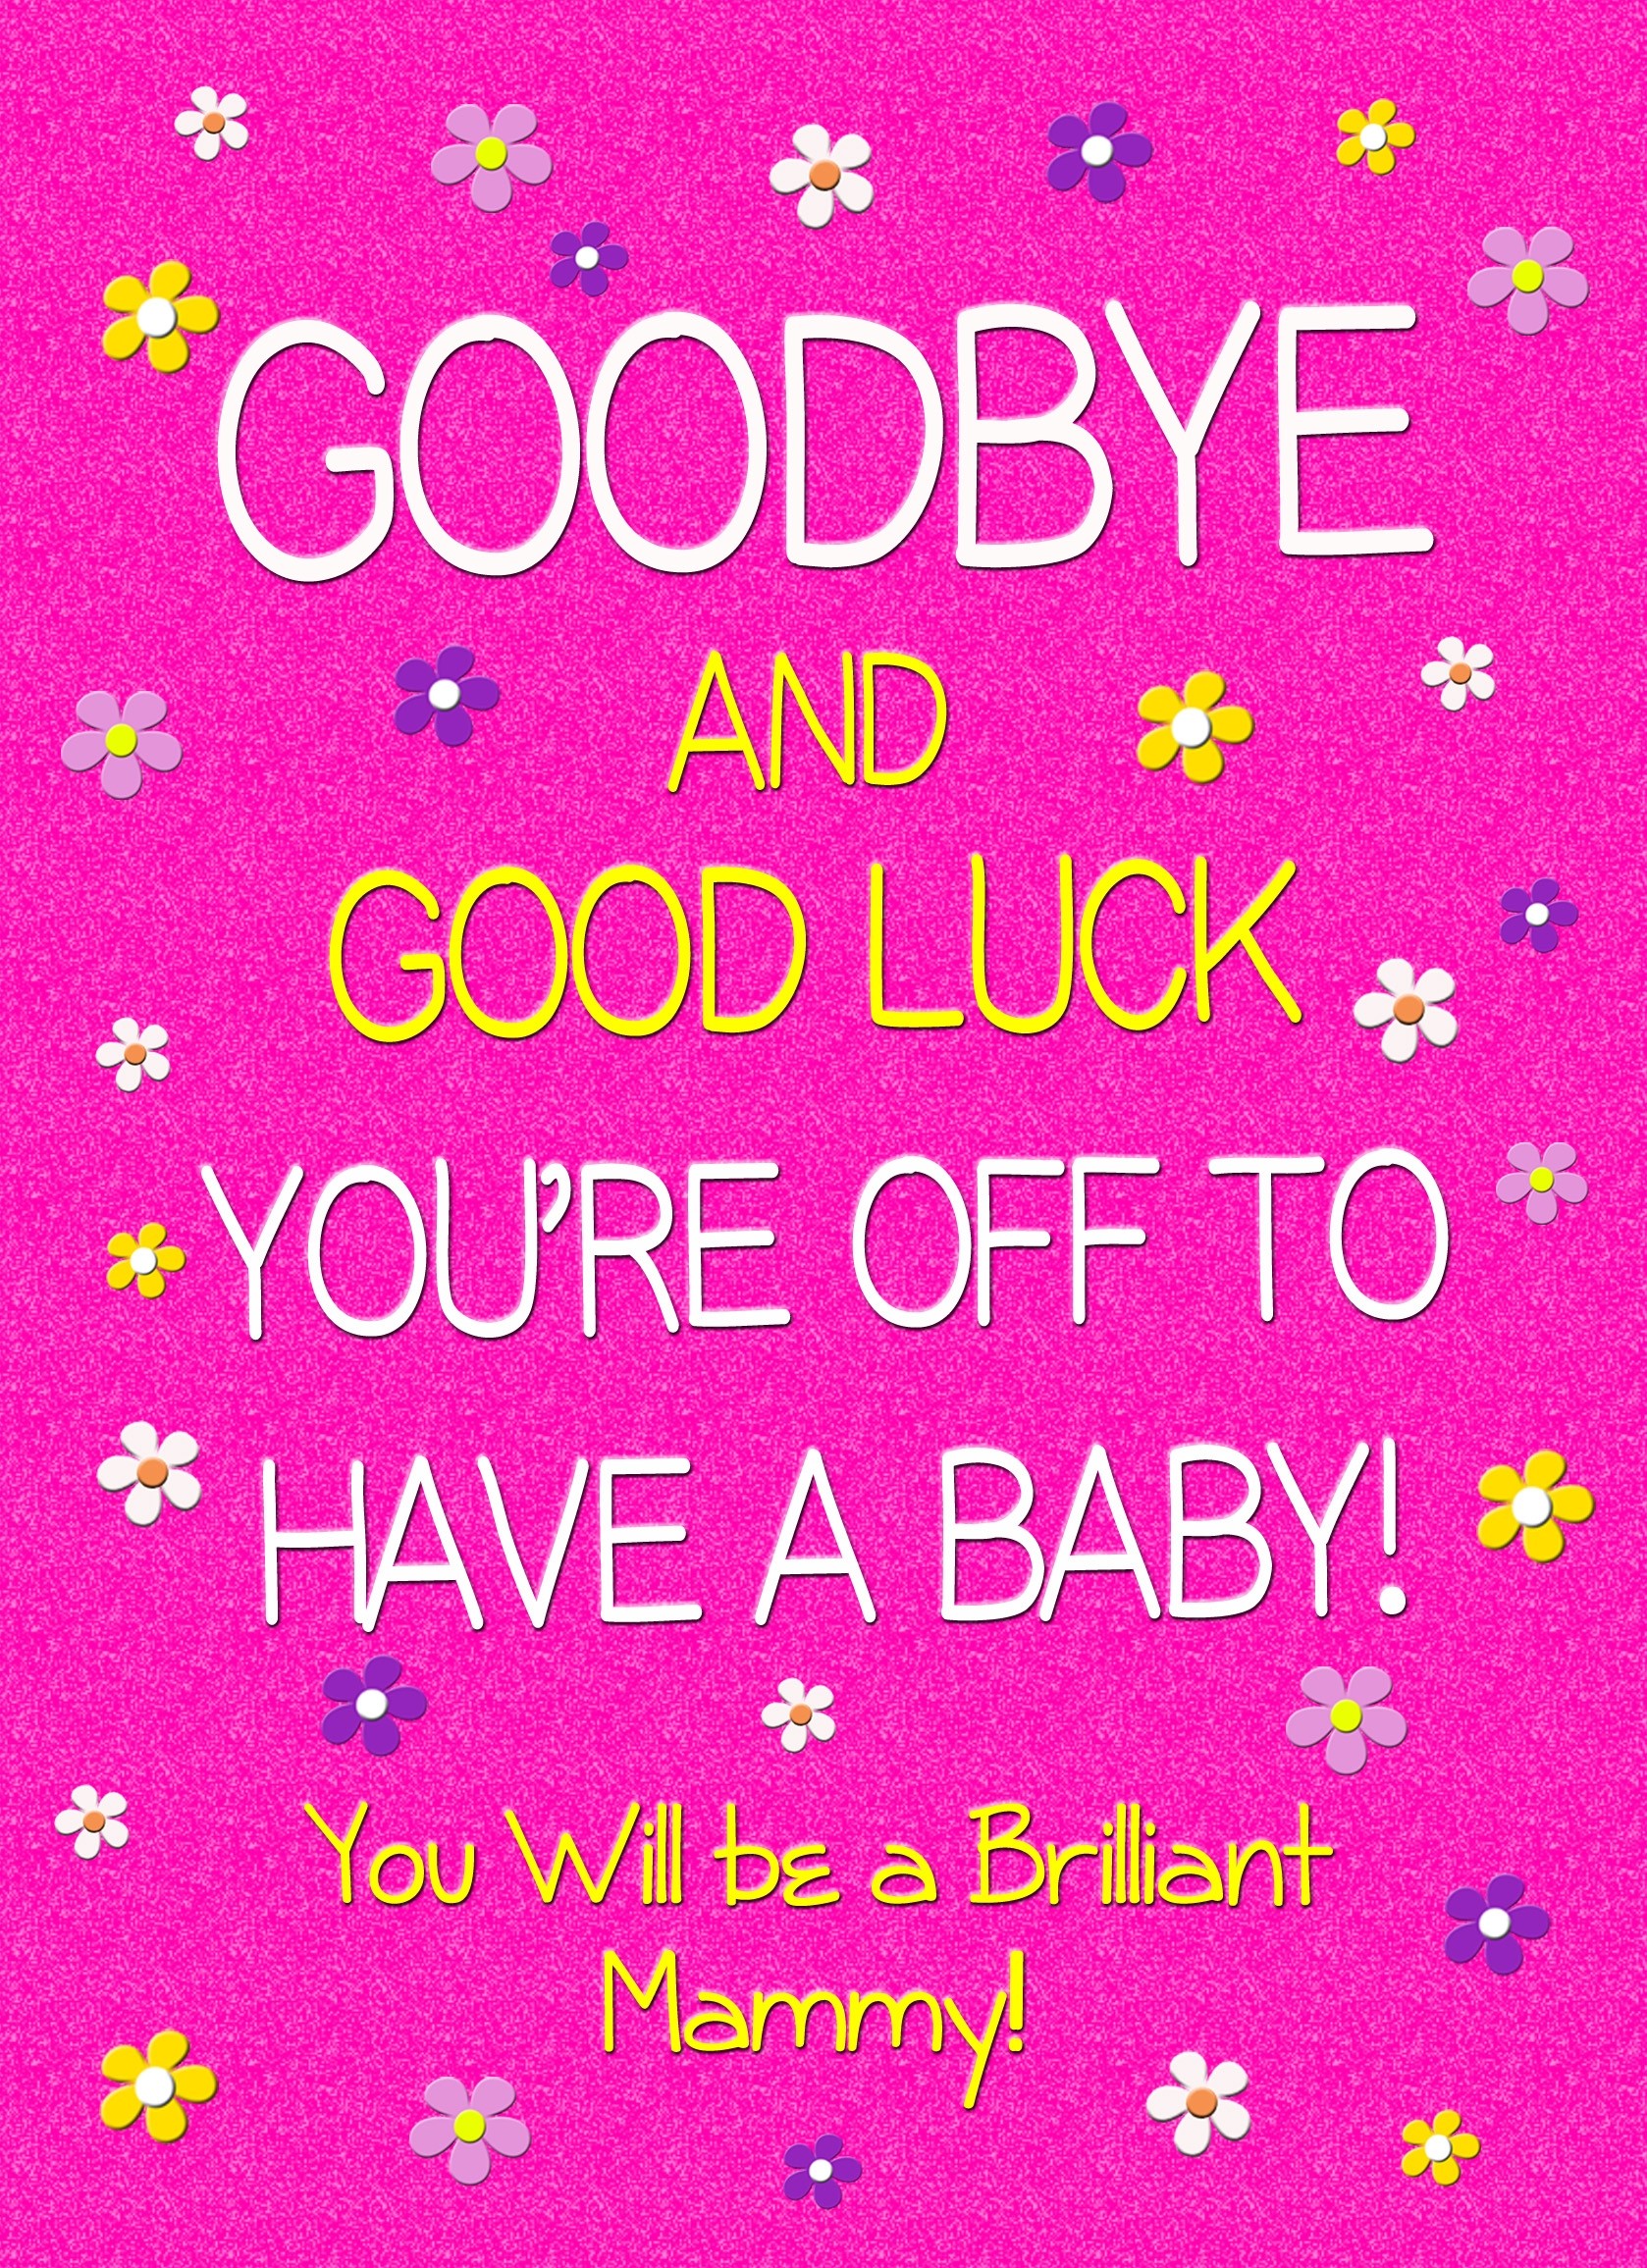 Maternity Leave Baby Pregnancy Expecting Card (Pink, Mammy)